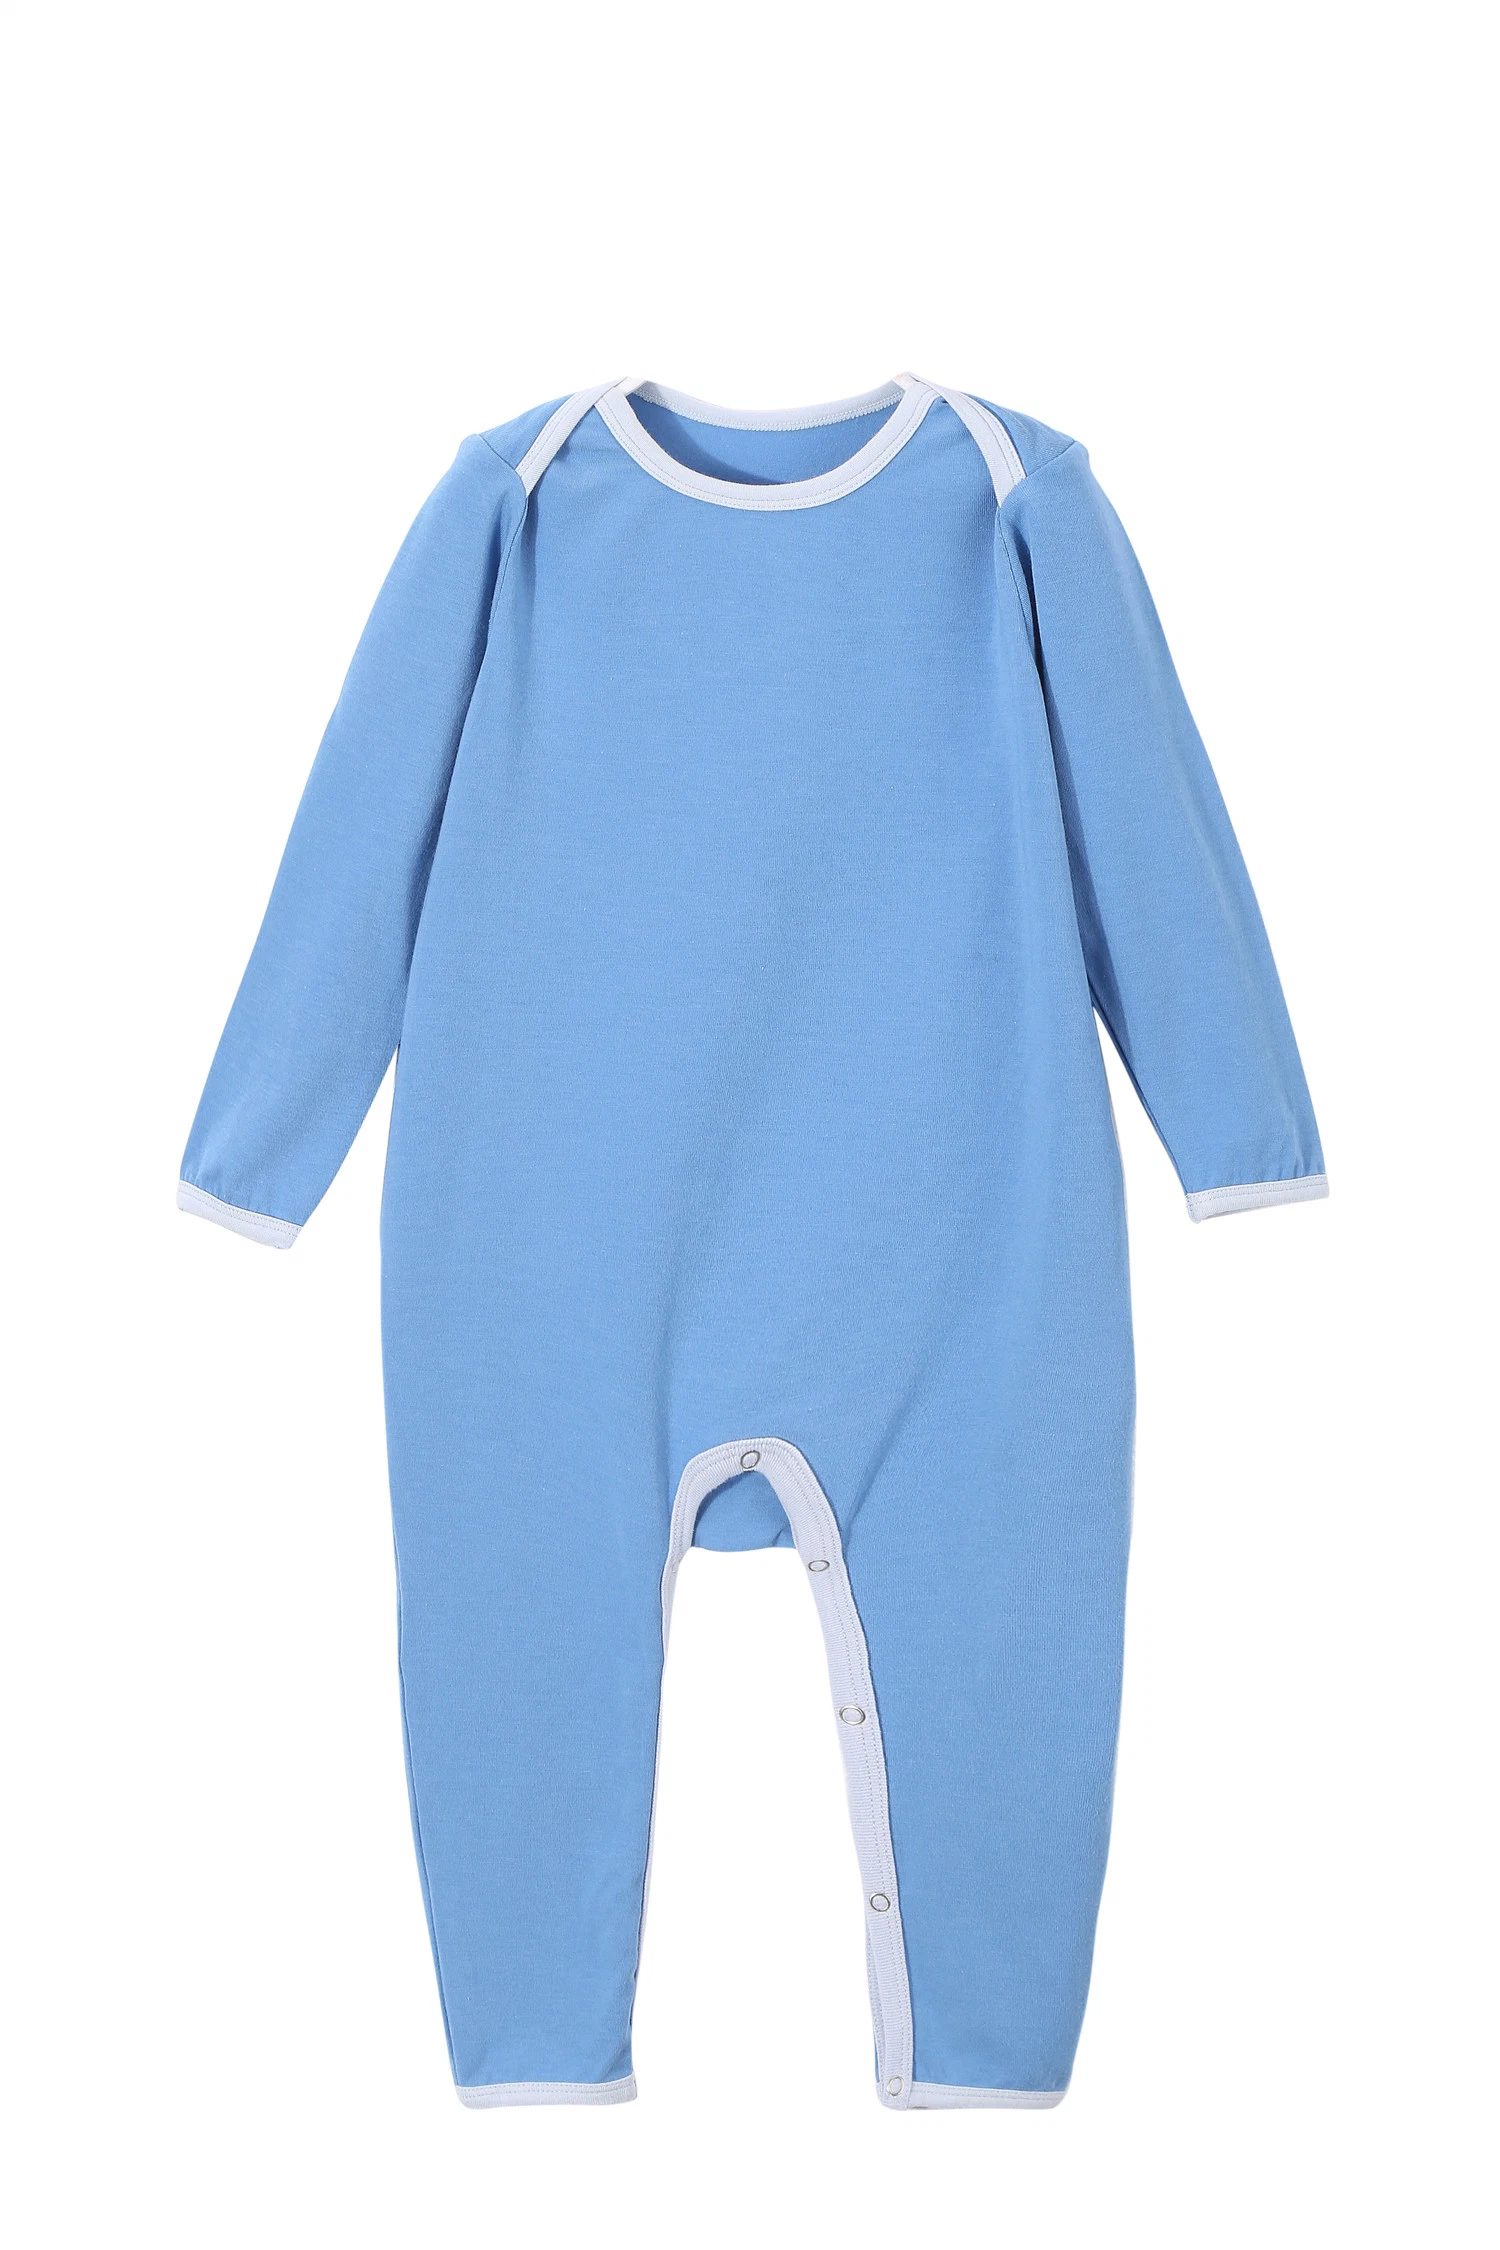 Bamboo Cotton Baby Infant Coverall Soft Infant Apparel